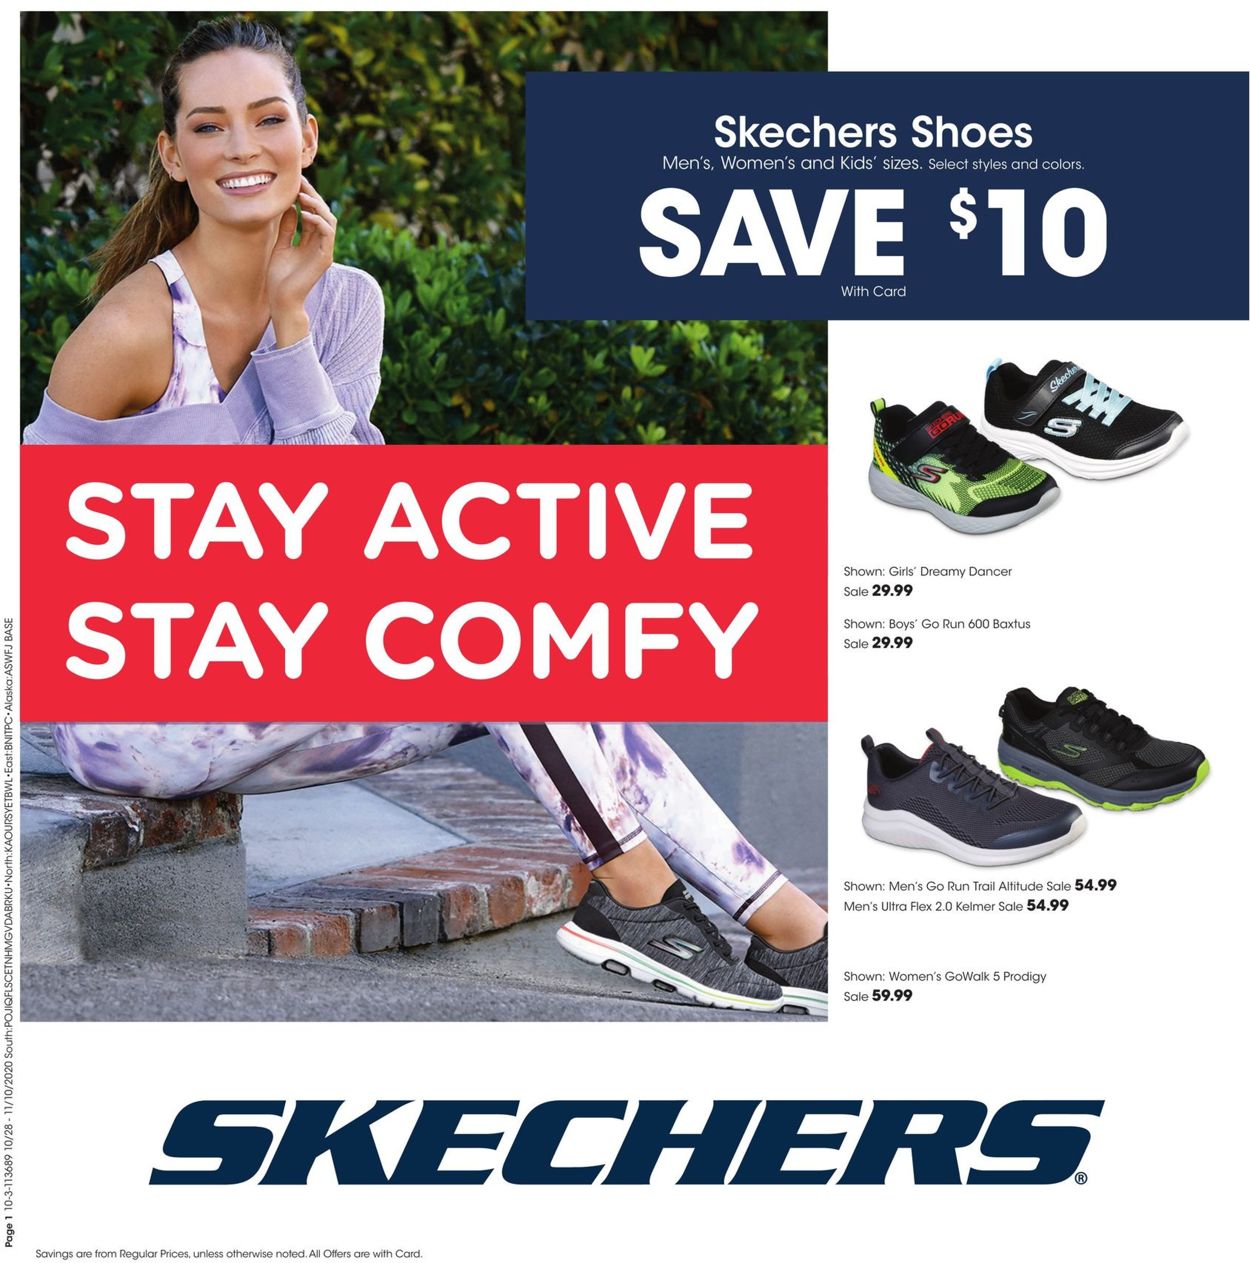 fred meyer skechers shoes